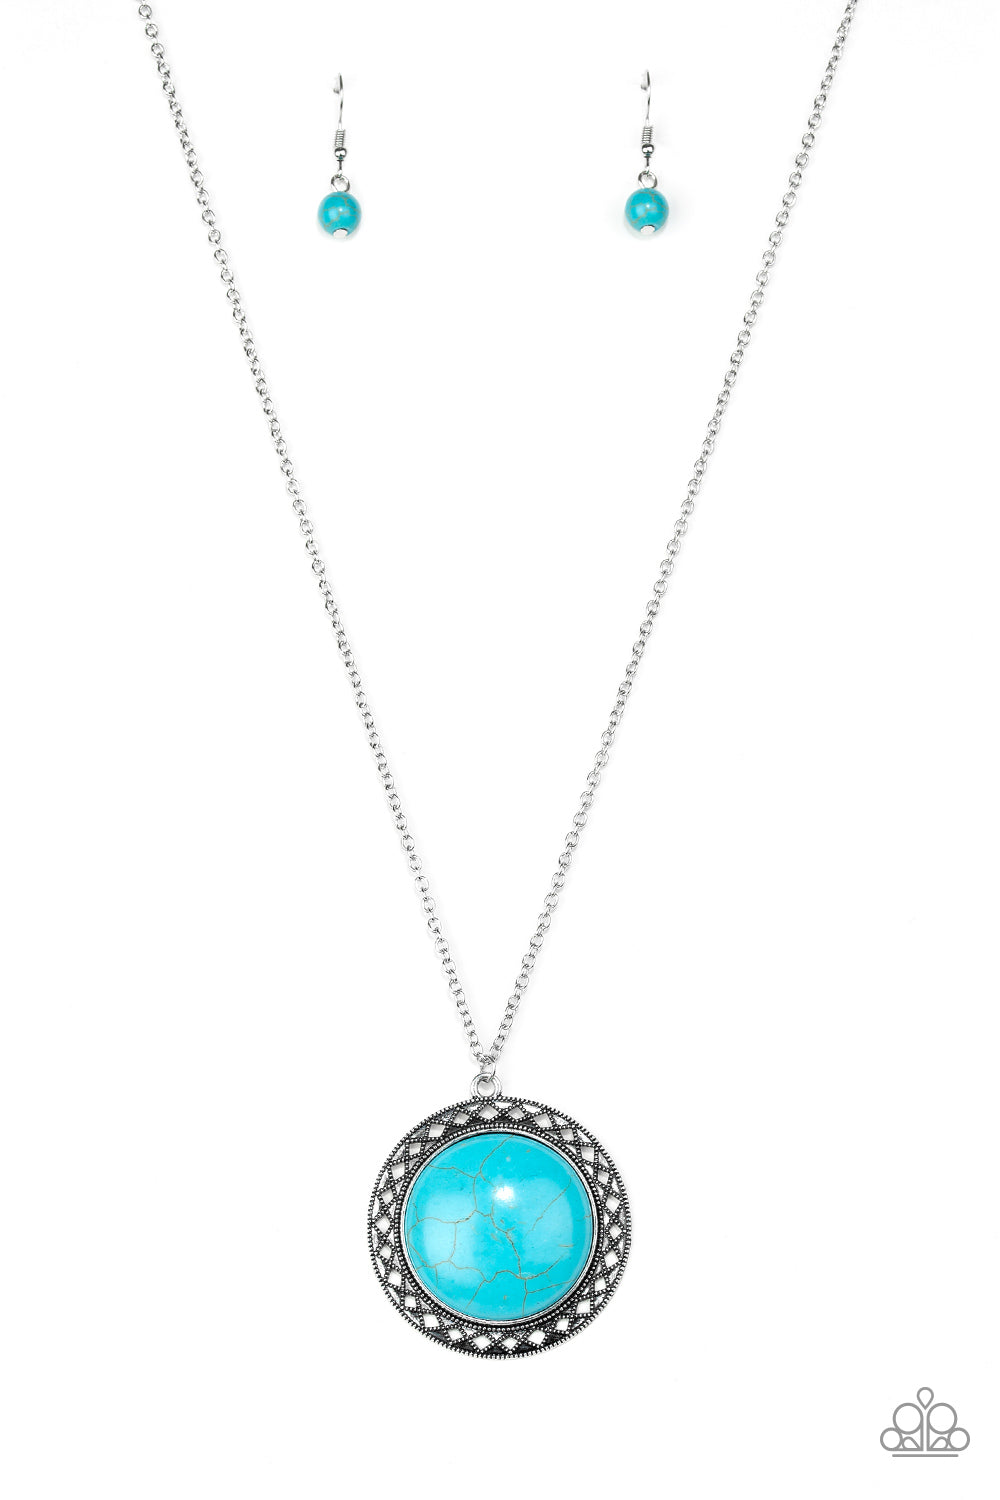 Run Out of Rodeo - blue - Paparazzi necklace